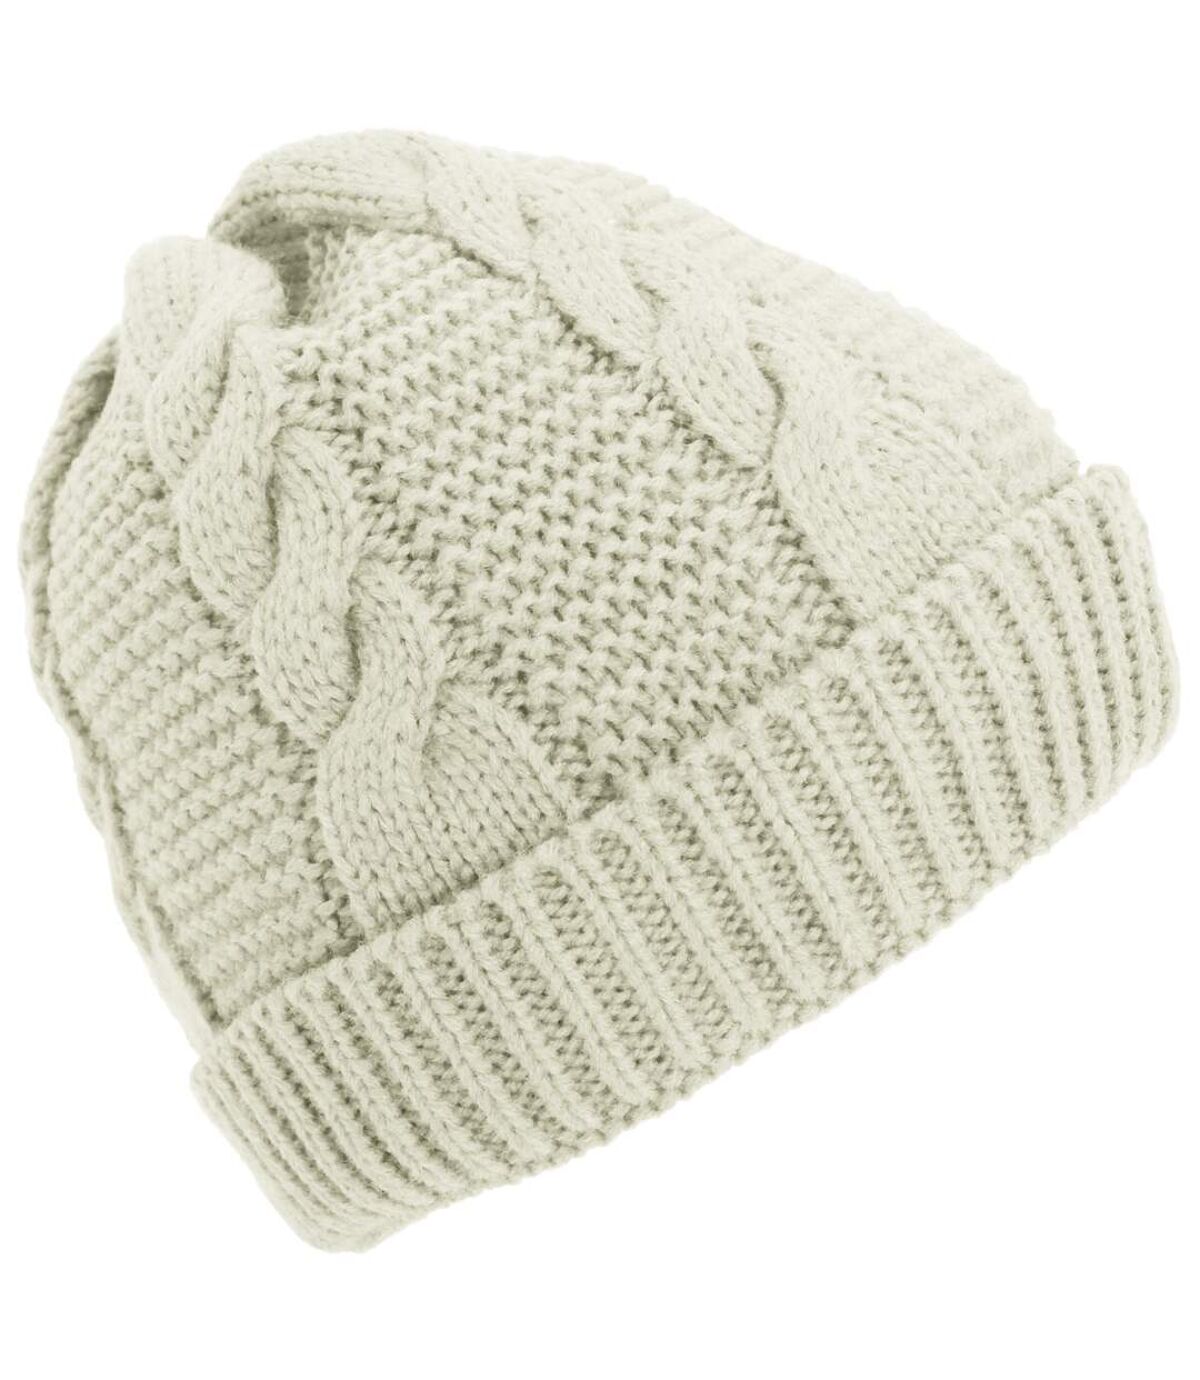 Ladies/Womens Cable Knit Fleece Lined Winter Beanie Hat (Cream) - UTHA515